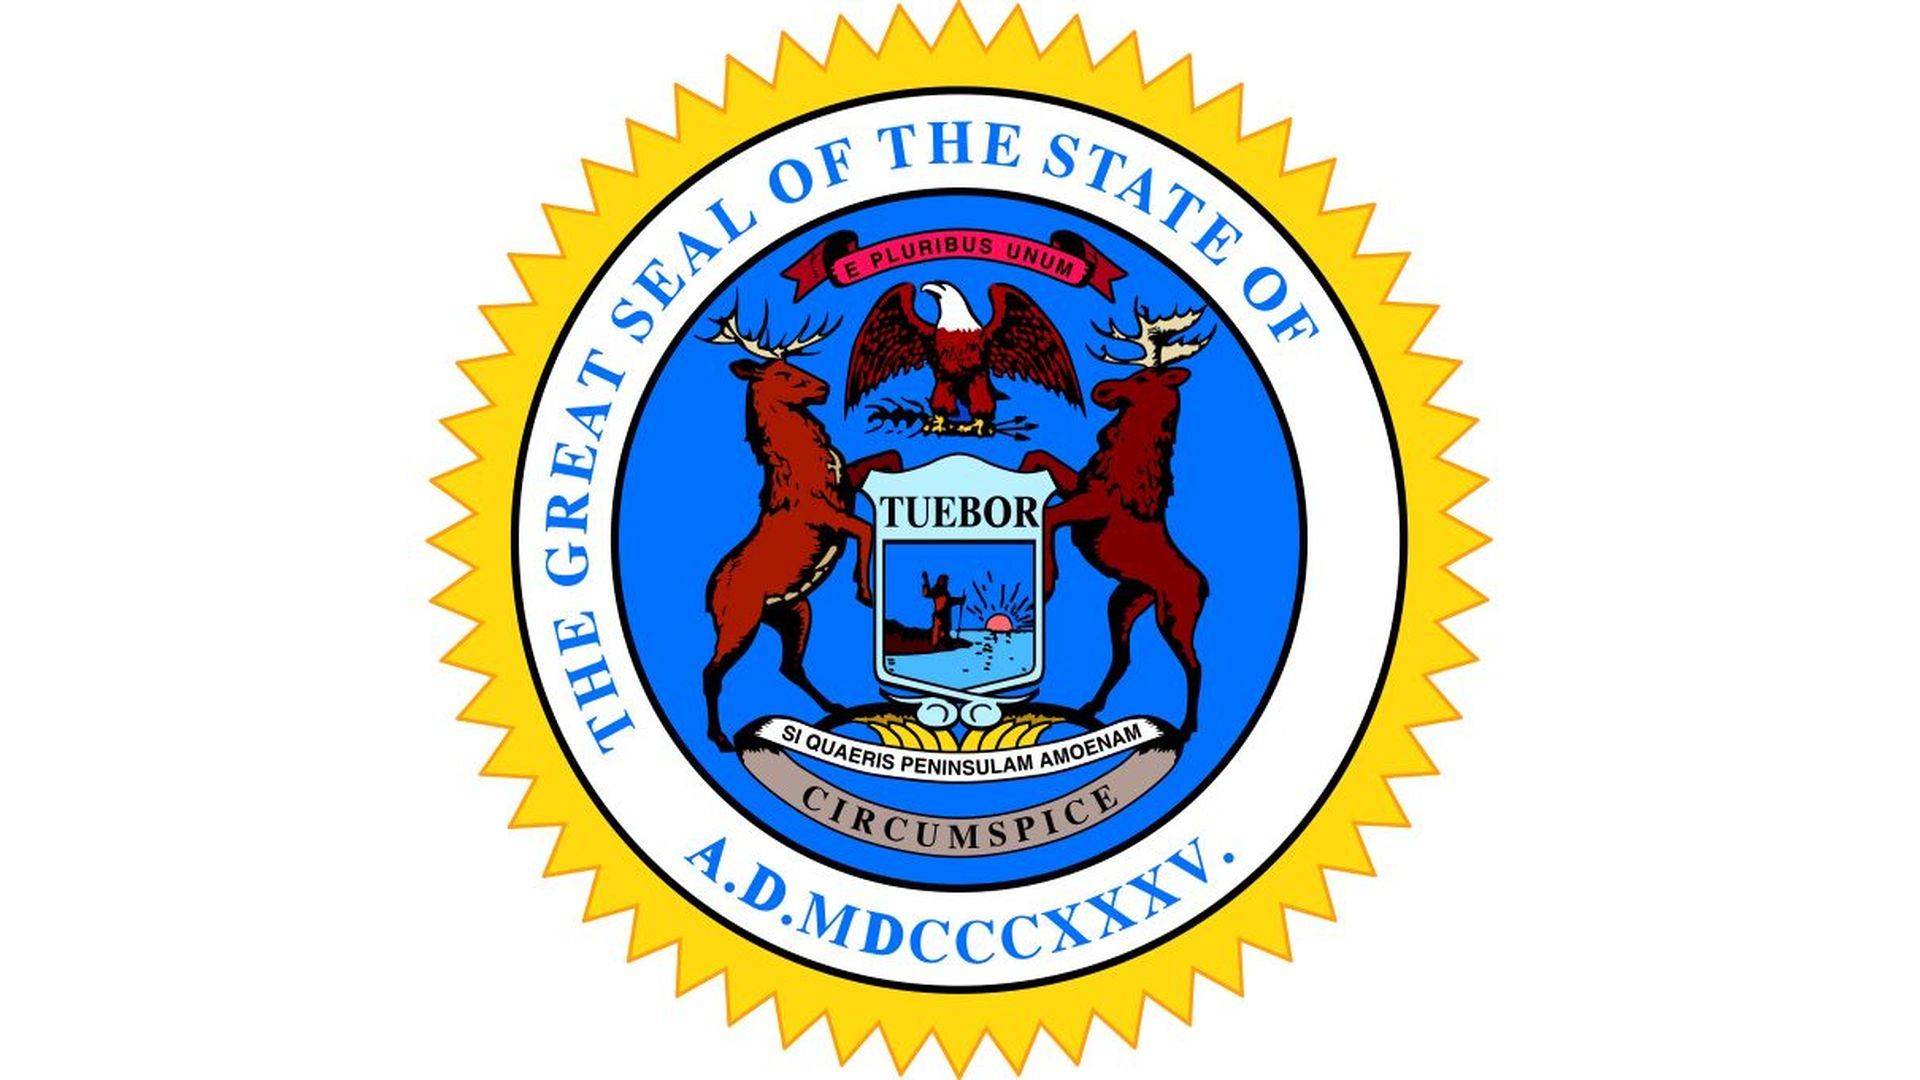 Can You Identify These State Seals?